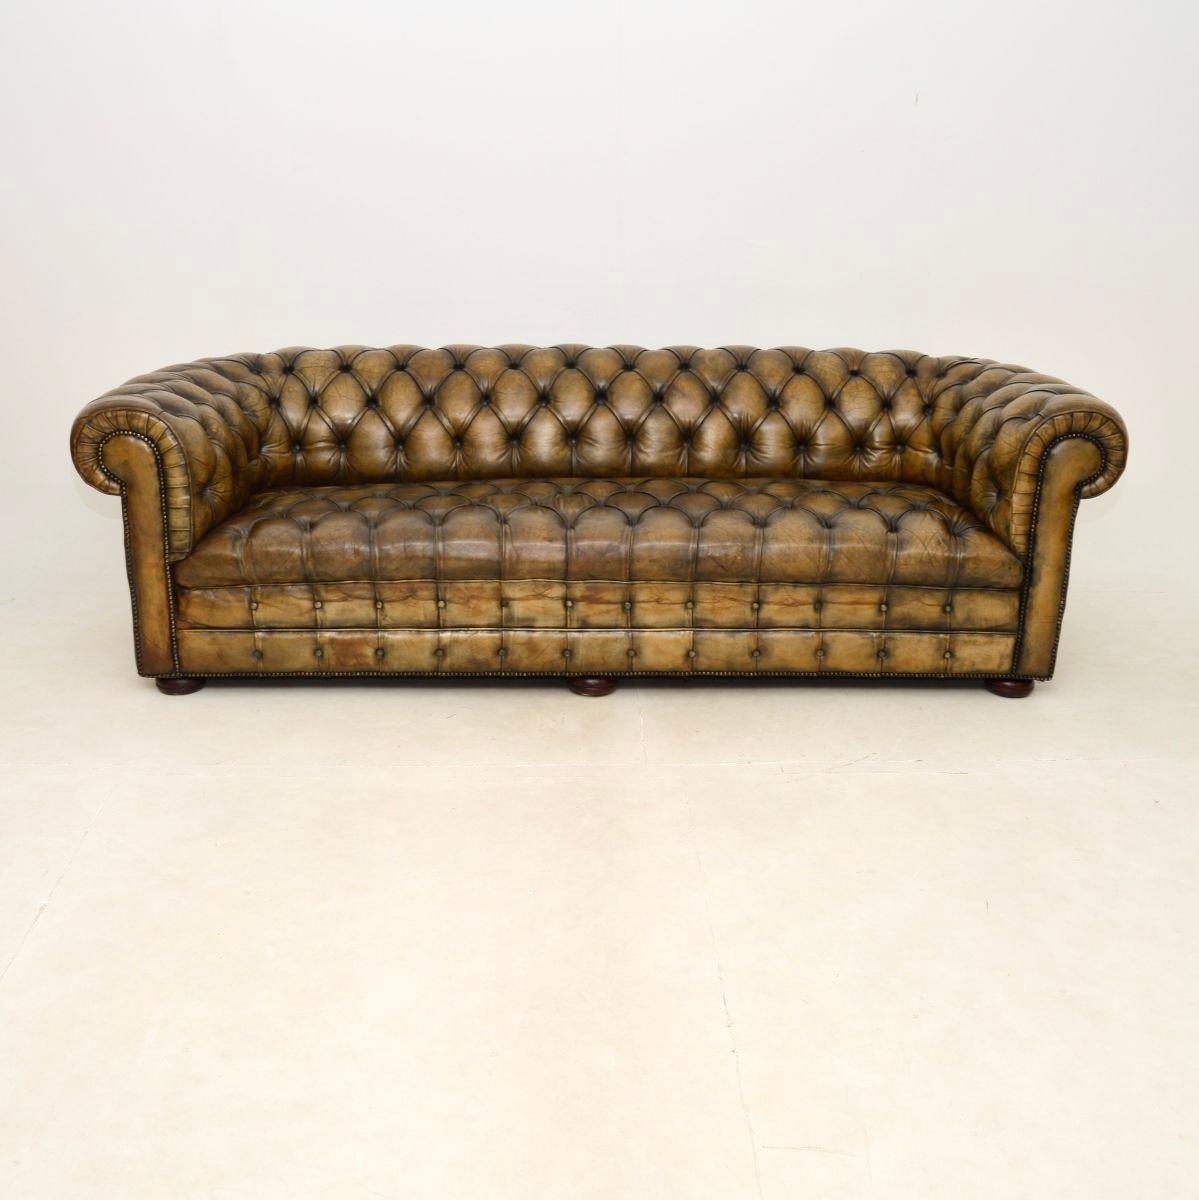 A large and very impressive antique leather Chesterfield sofa. This was made in England & we would date it to around the 1880-1890’s period.

The quality is outstanding, this is extremely well made and comfortable. The deep buttoned leather has a